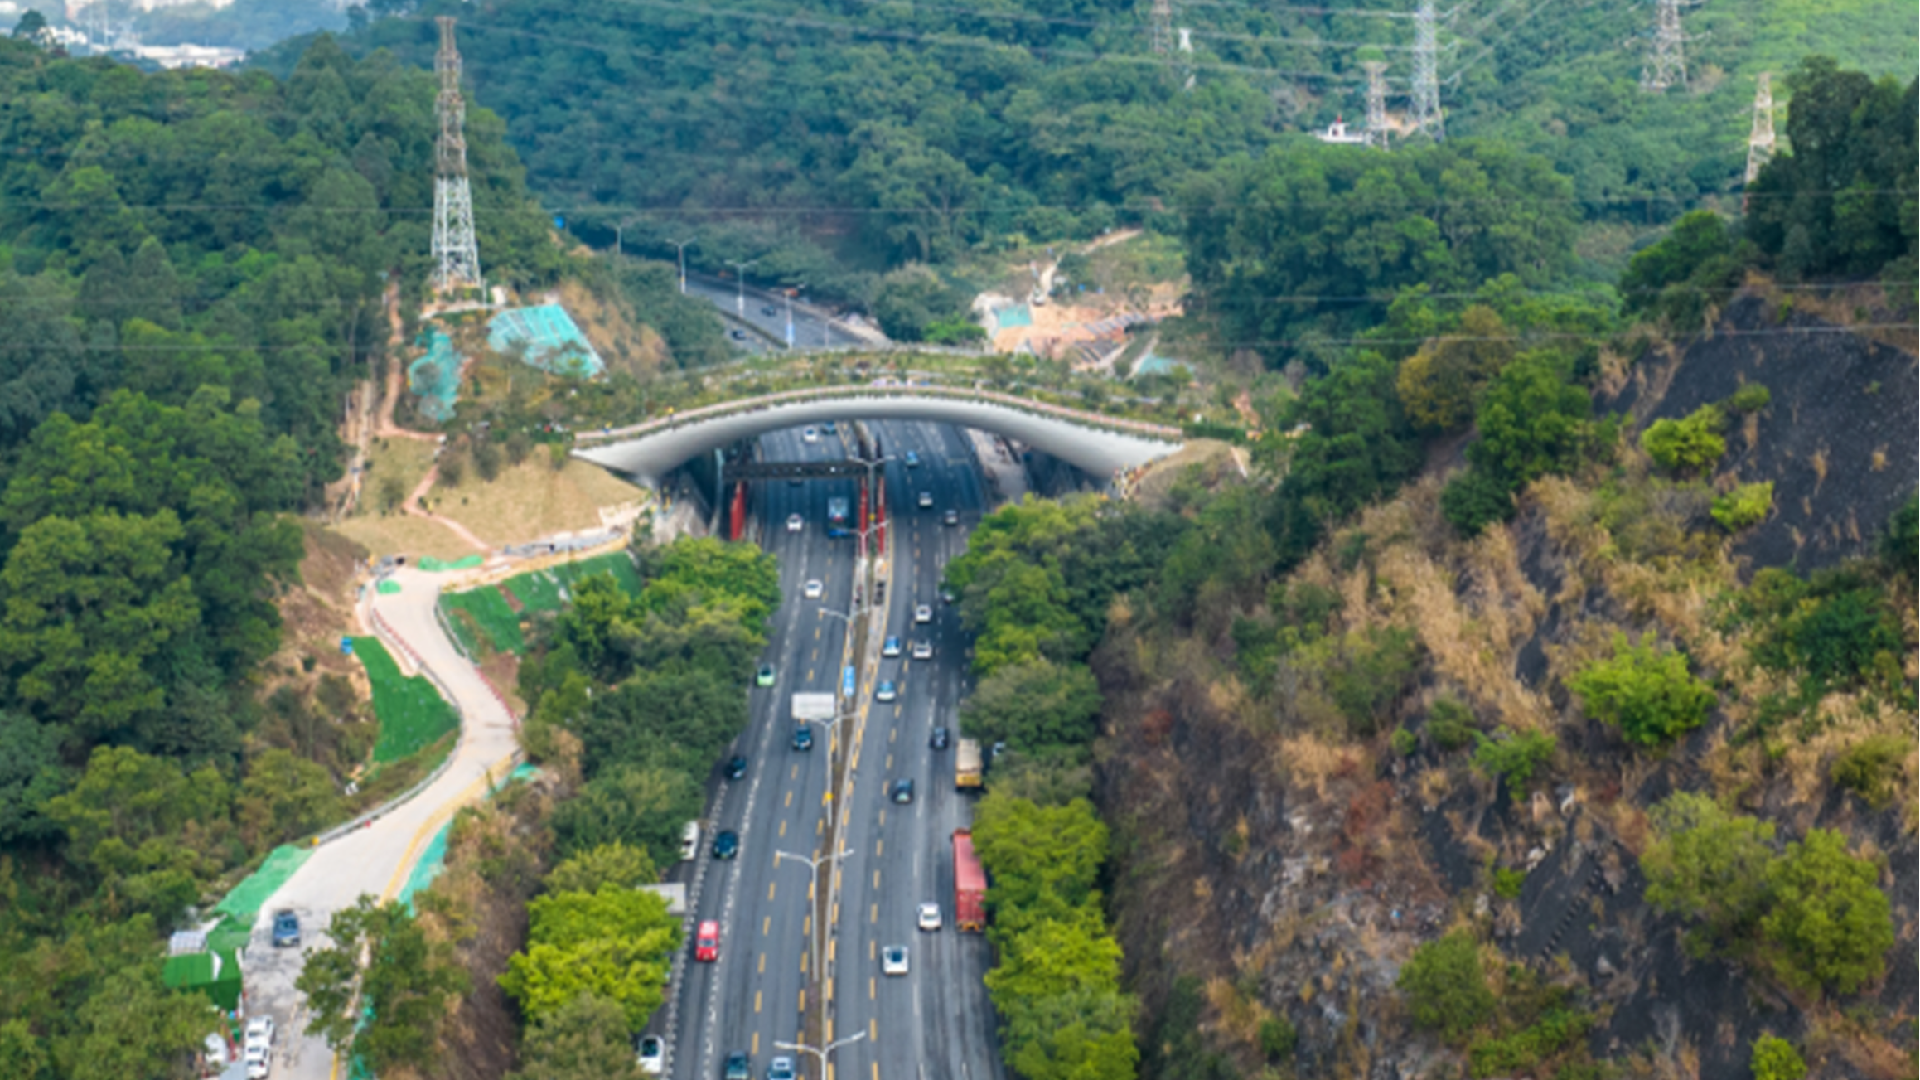 Check out this wildlife overpass in Shenzhen